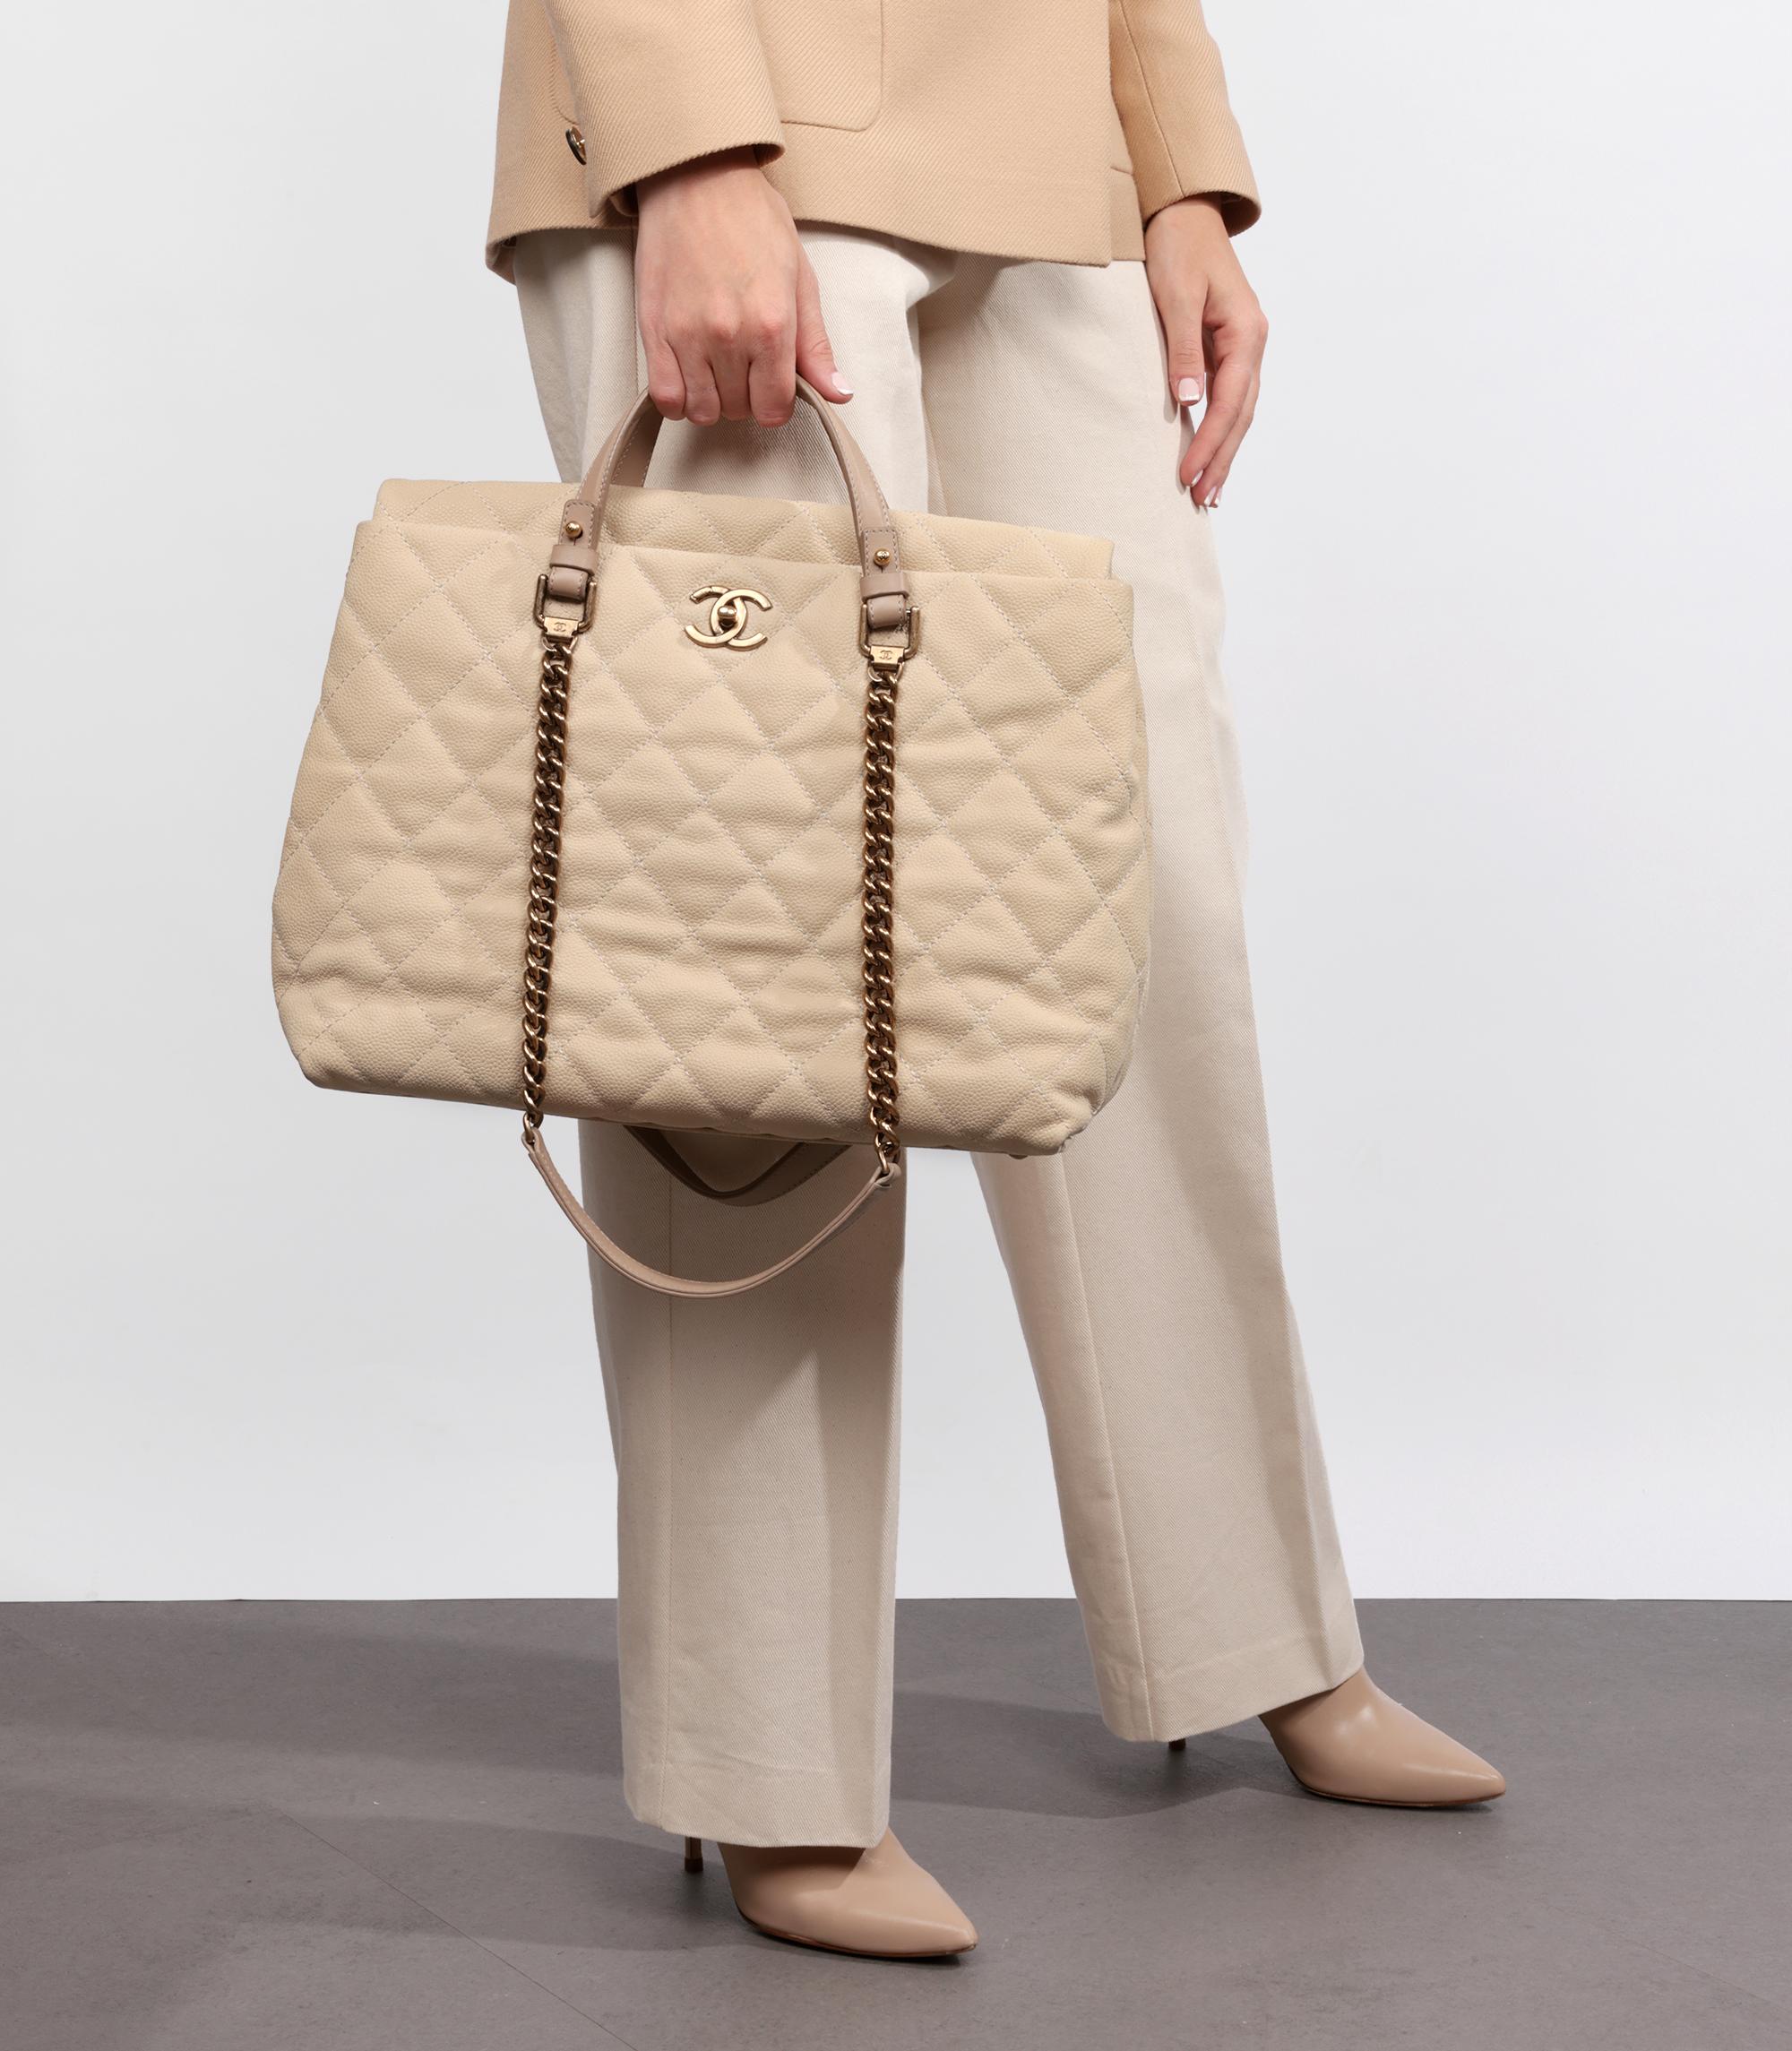 Chanel Beige Quilted Caviar Leather & Taupe Calfskin Leather Large Portobello Shoulder Tote

Brand- Chanel
Model- Large Portobello Shoulder Tote
Product Type- Shoulder, Tote
Serial Number- 17777178
Age- Circa 2012
Accompanied By- Chanel Dust